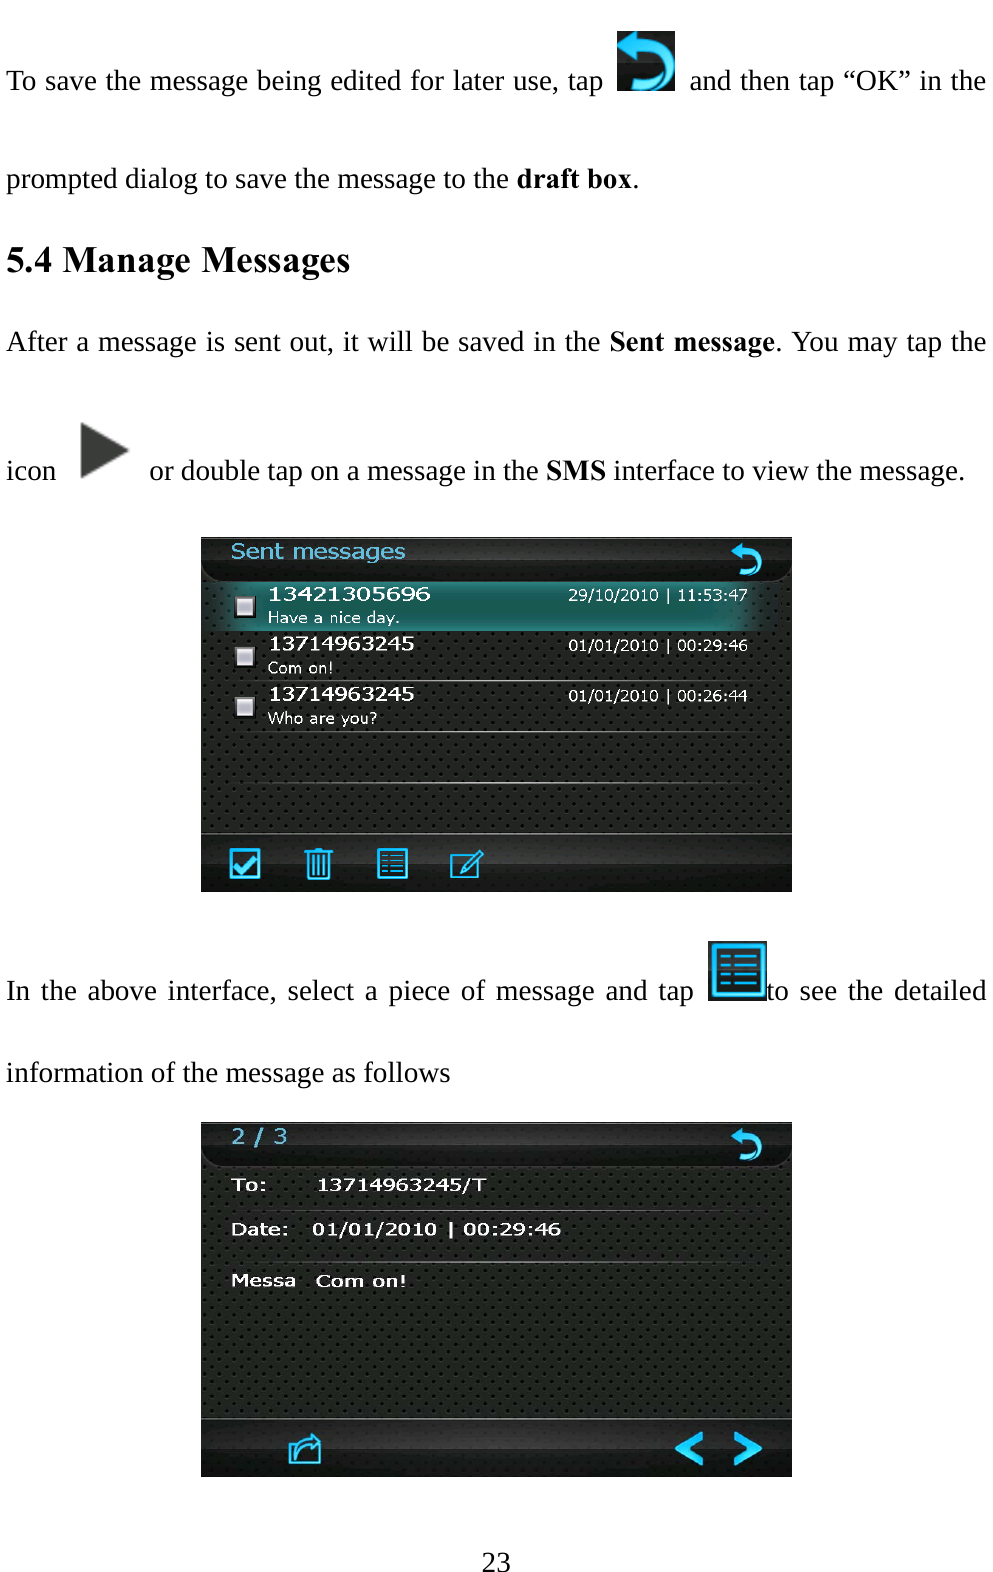  23 To save the message being edited for later use, tap    and then tap “OK” in the prompted dialog to save the message to the draft box. 5.4 Manage Messages After a message is sent out, it will be saved in the Sent message. You may tap the icon    or double tap on a message in the SMS interface to view the message.  In the above interface, select a piece of message and tap  to see the detailed information of the message as follows  